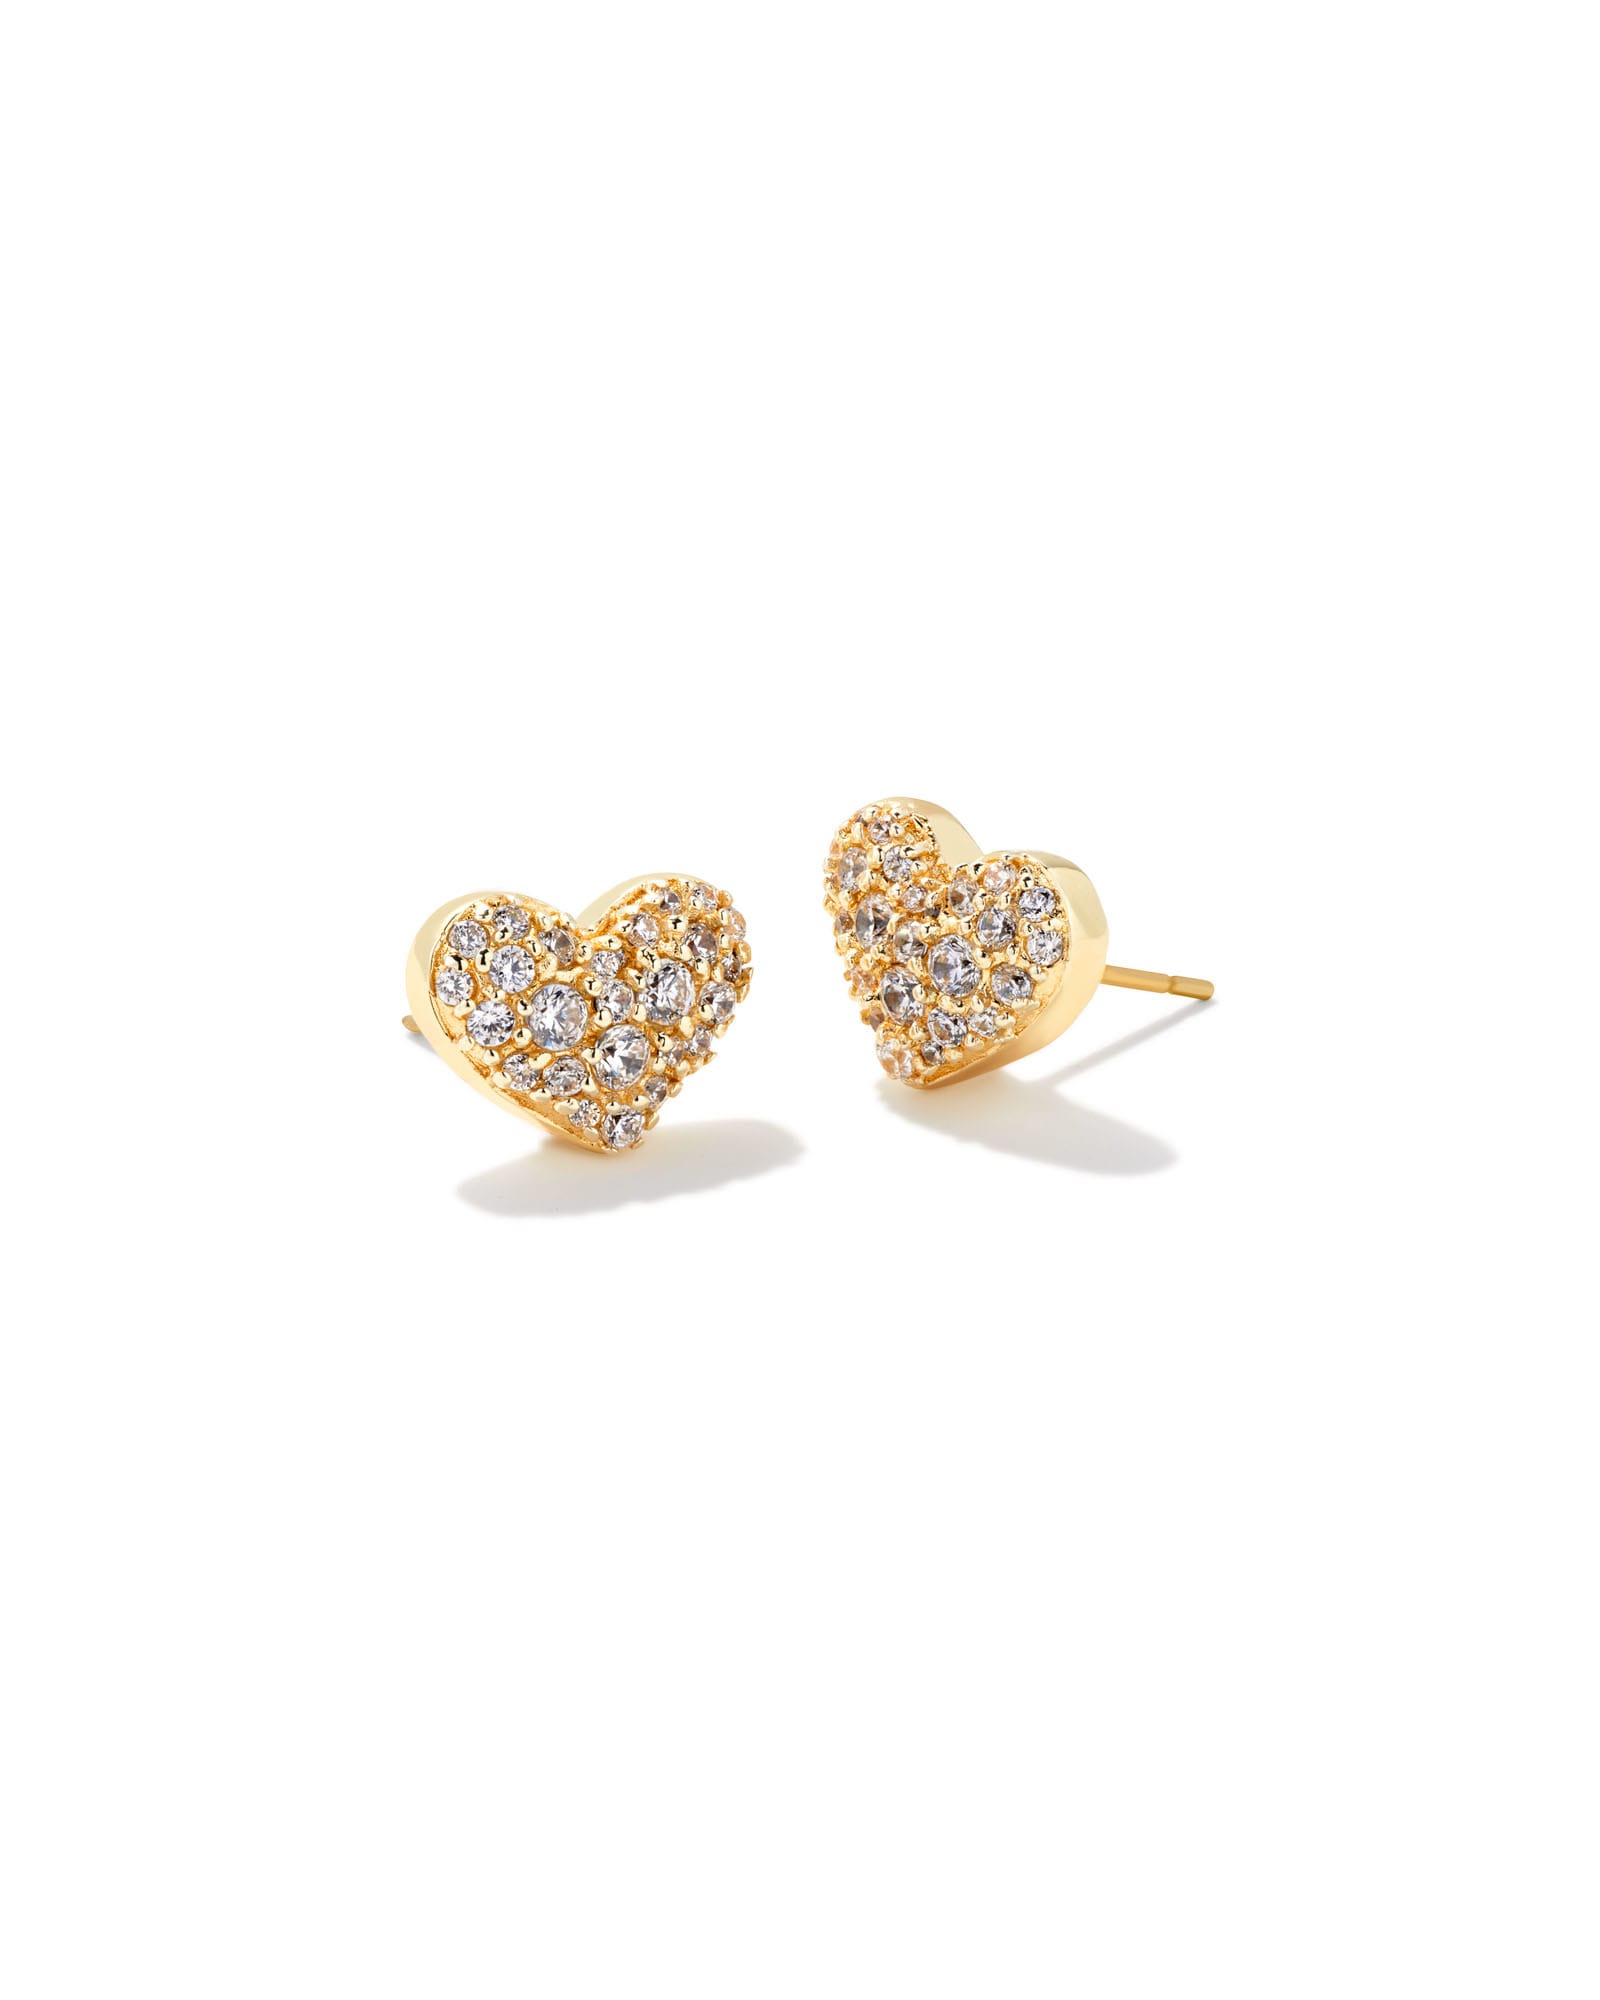 Kendra Scott Ari Gold Pave Crystal Heart Earrings in White Crystal | 14K Yellow Gold